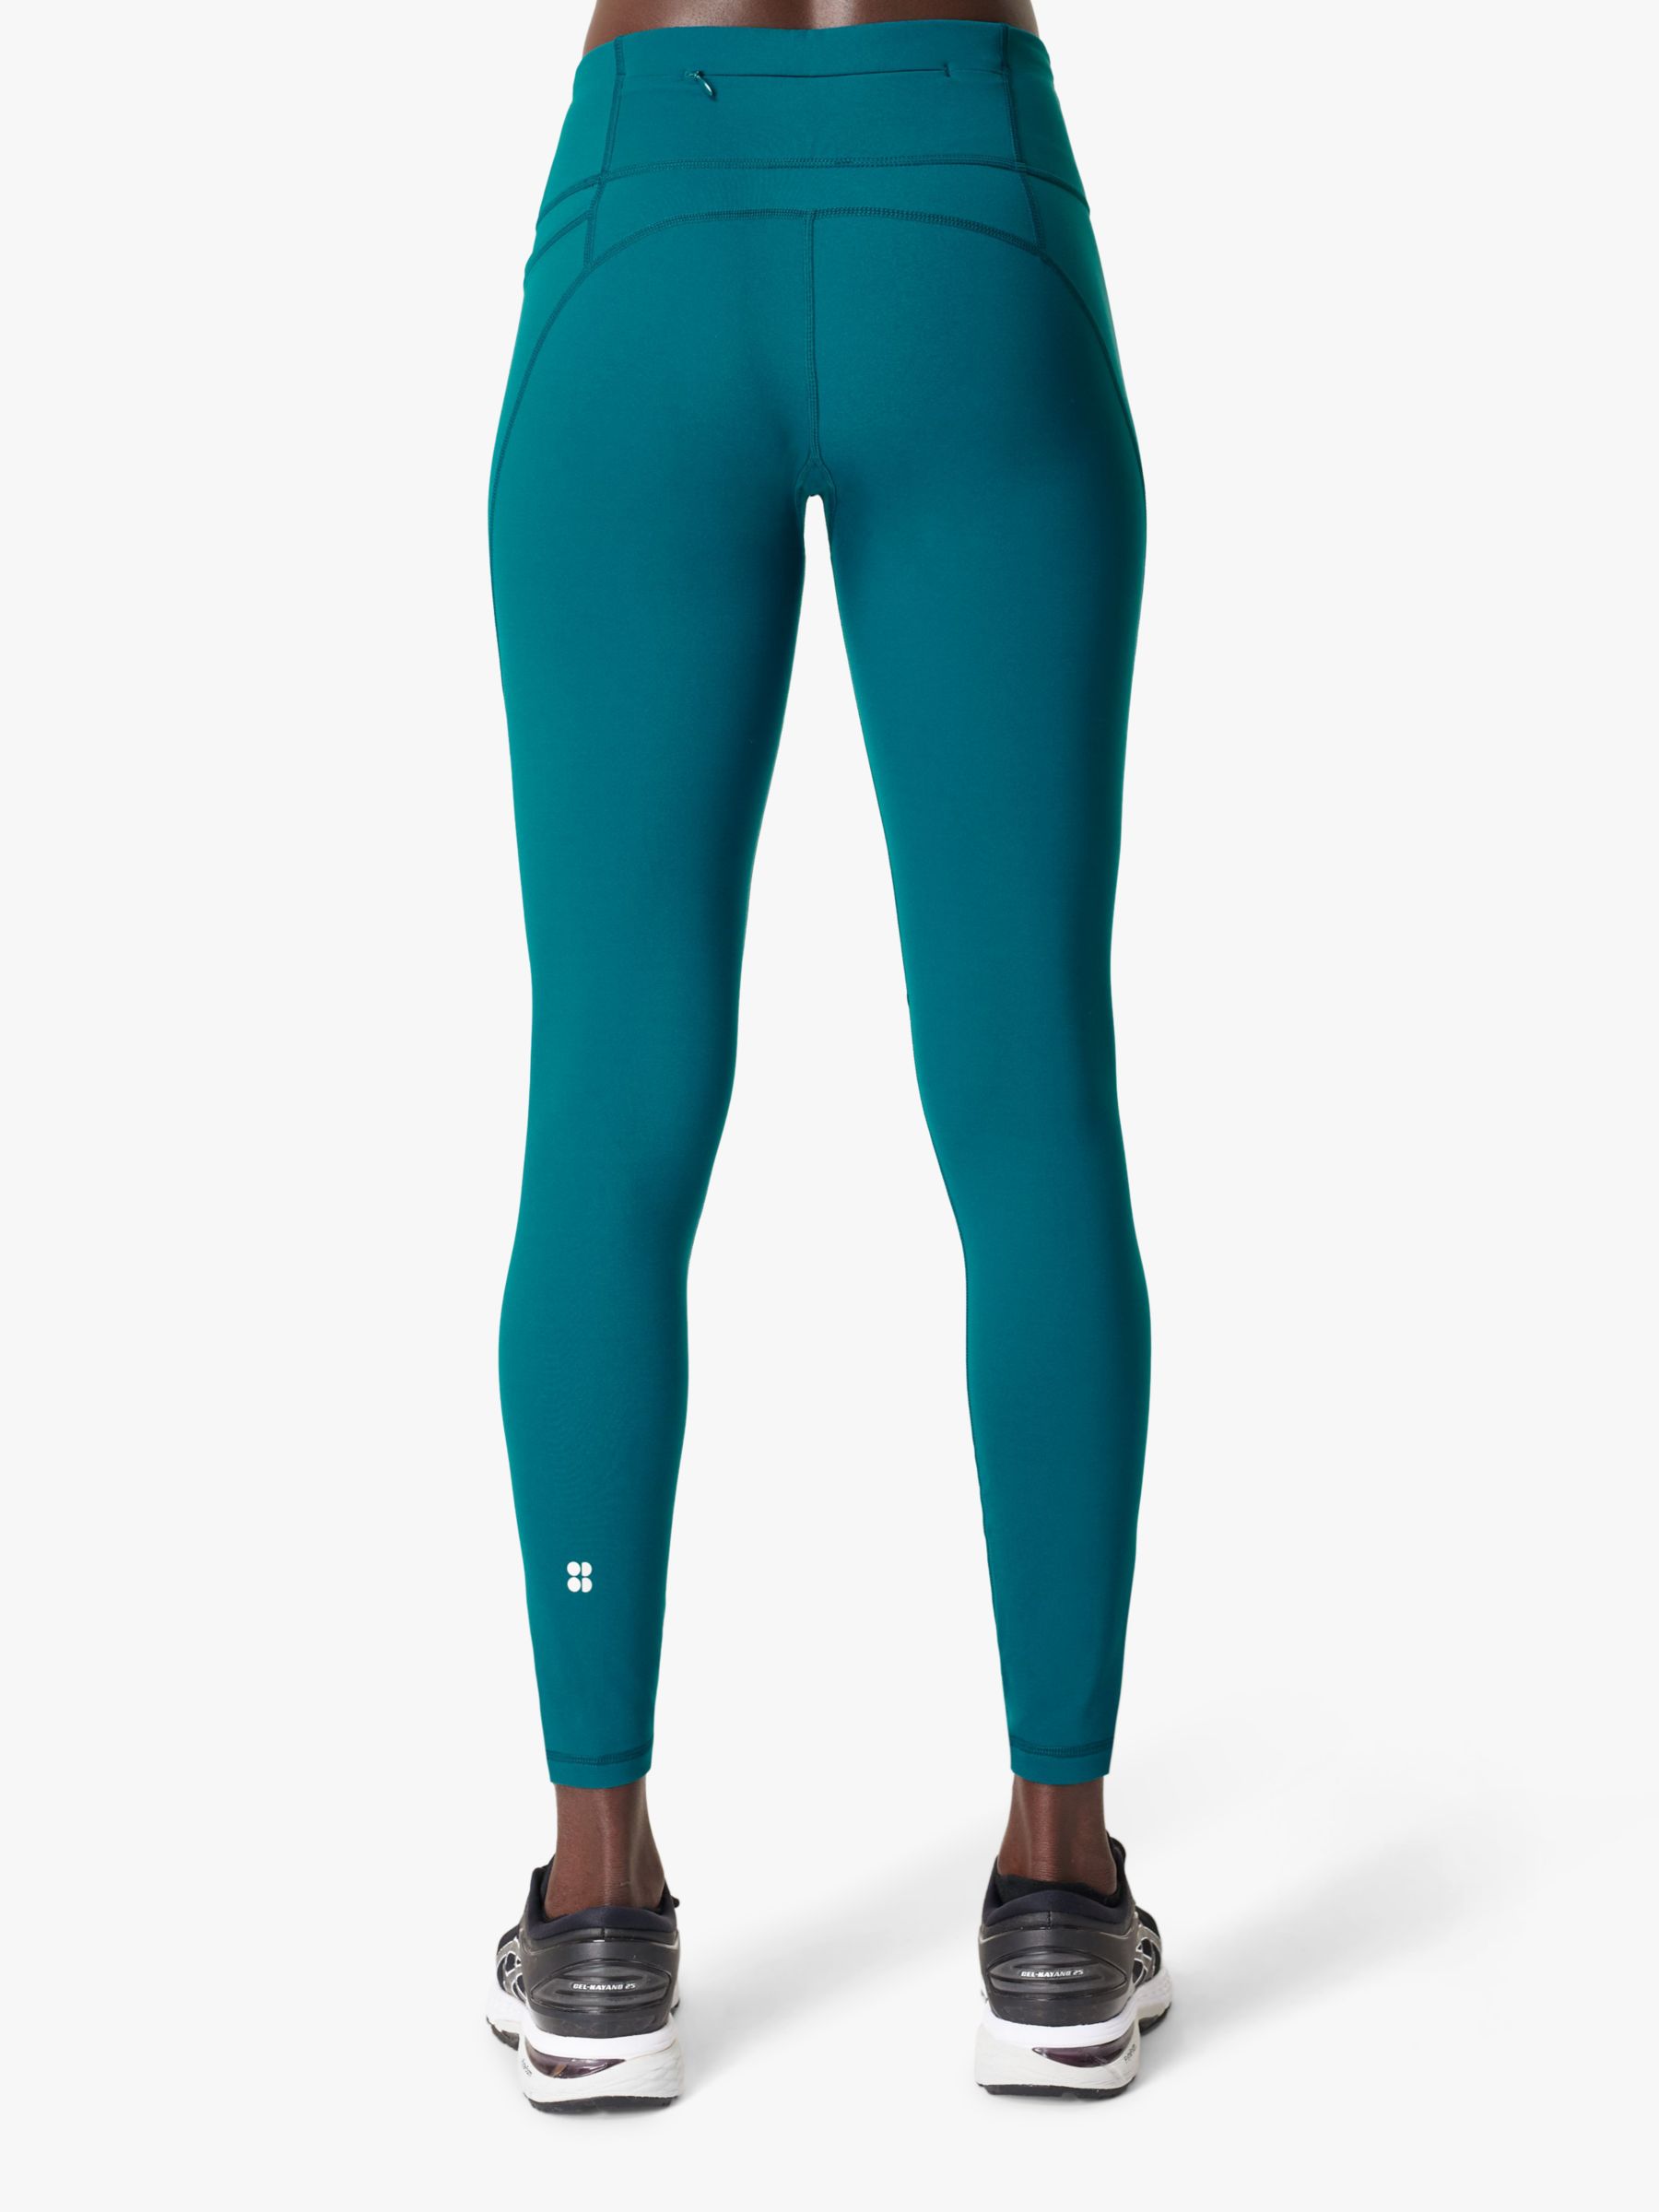 Sweaty Betty Power Leggings Review: Why I'm Obsessed